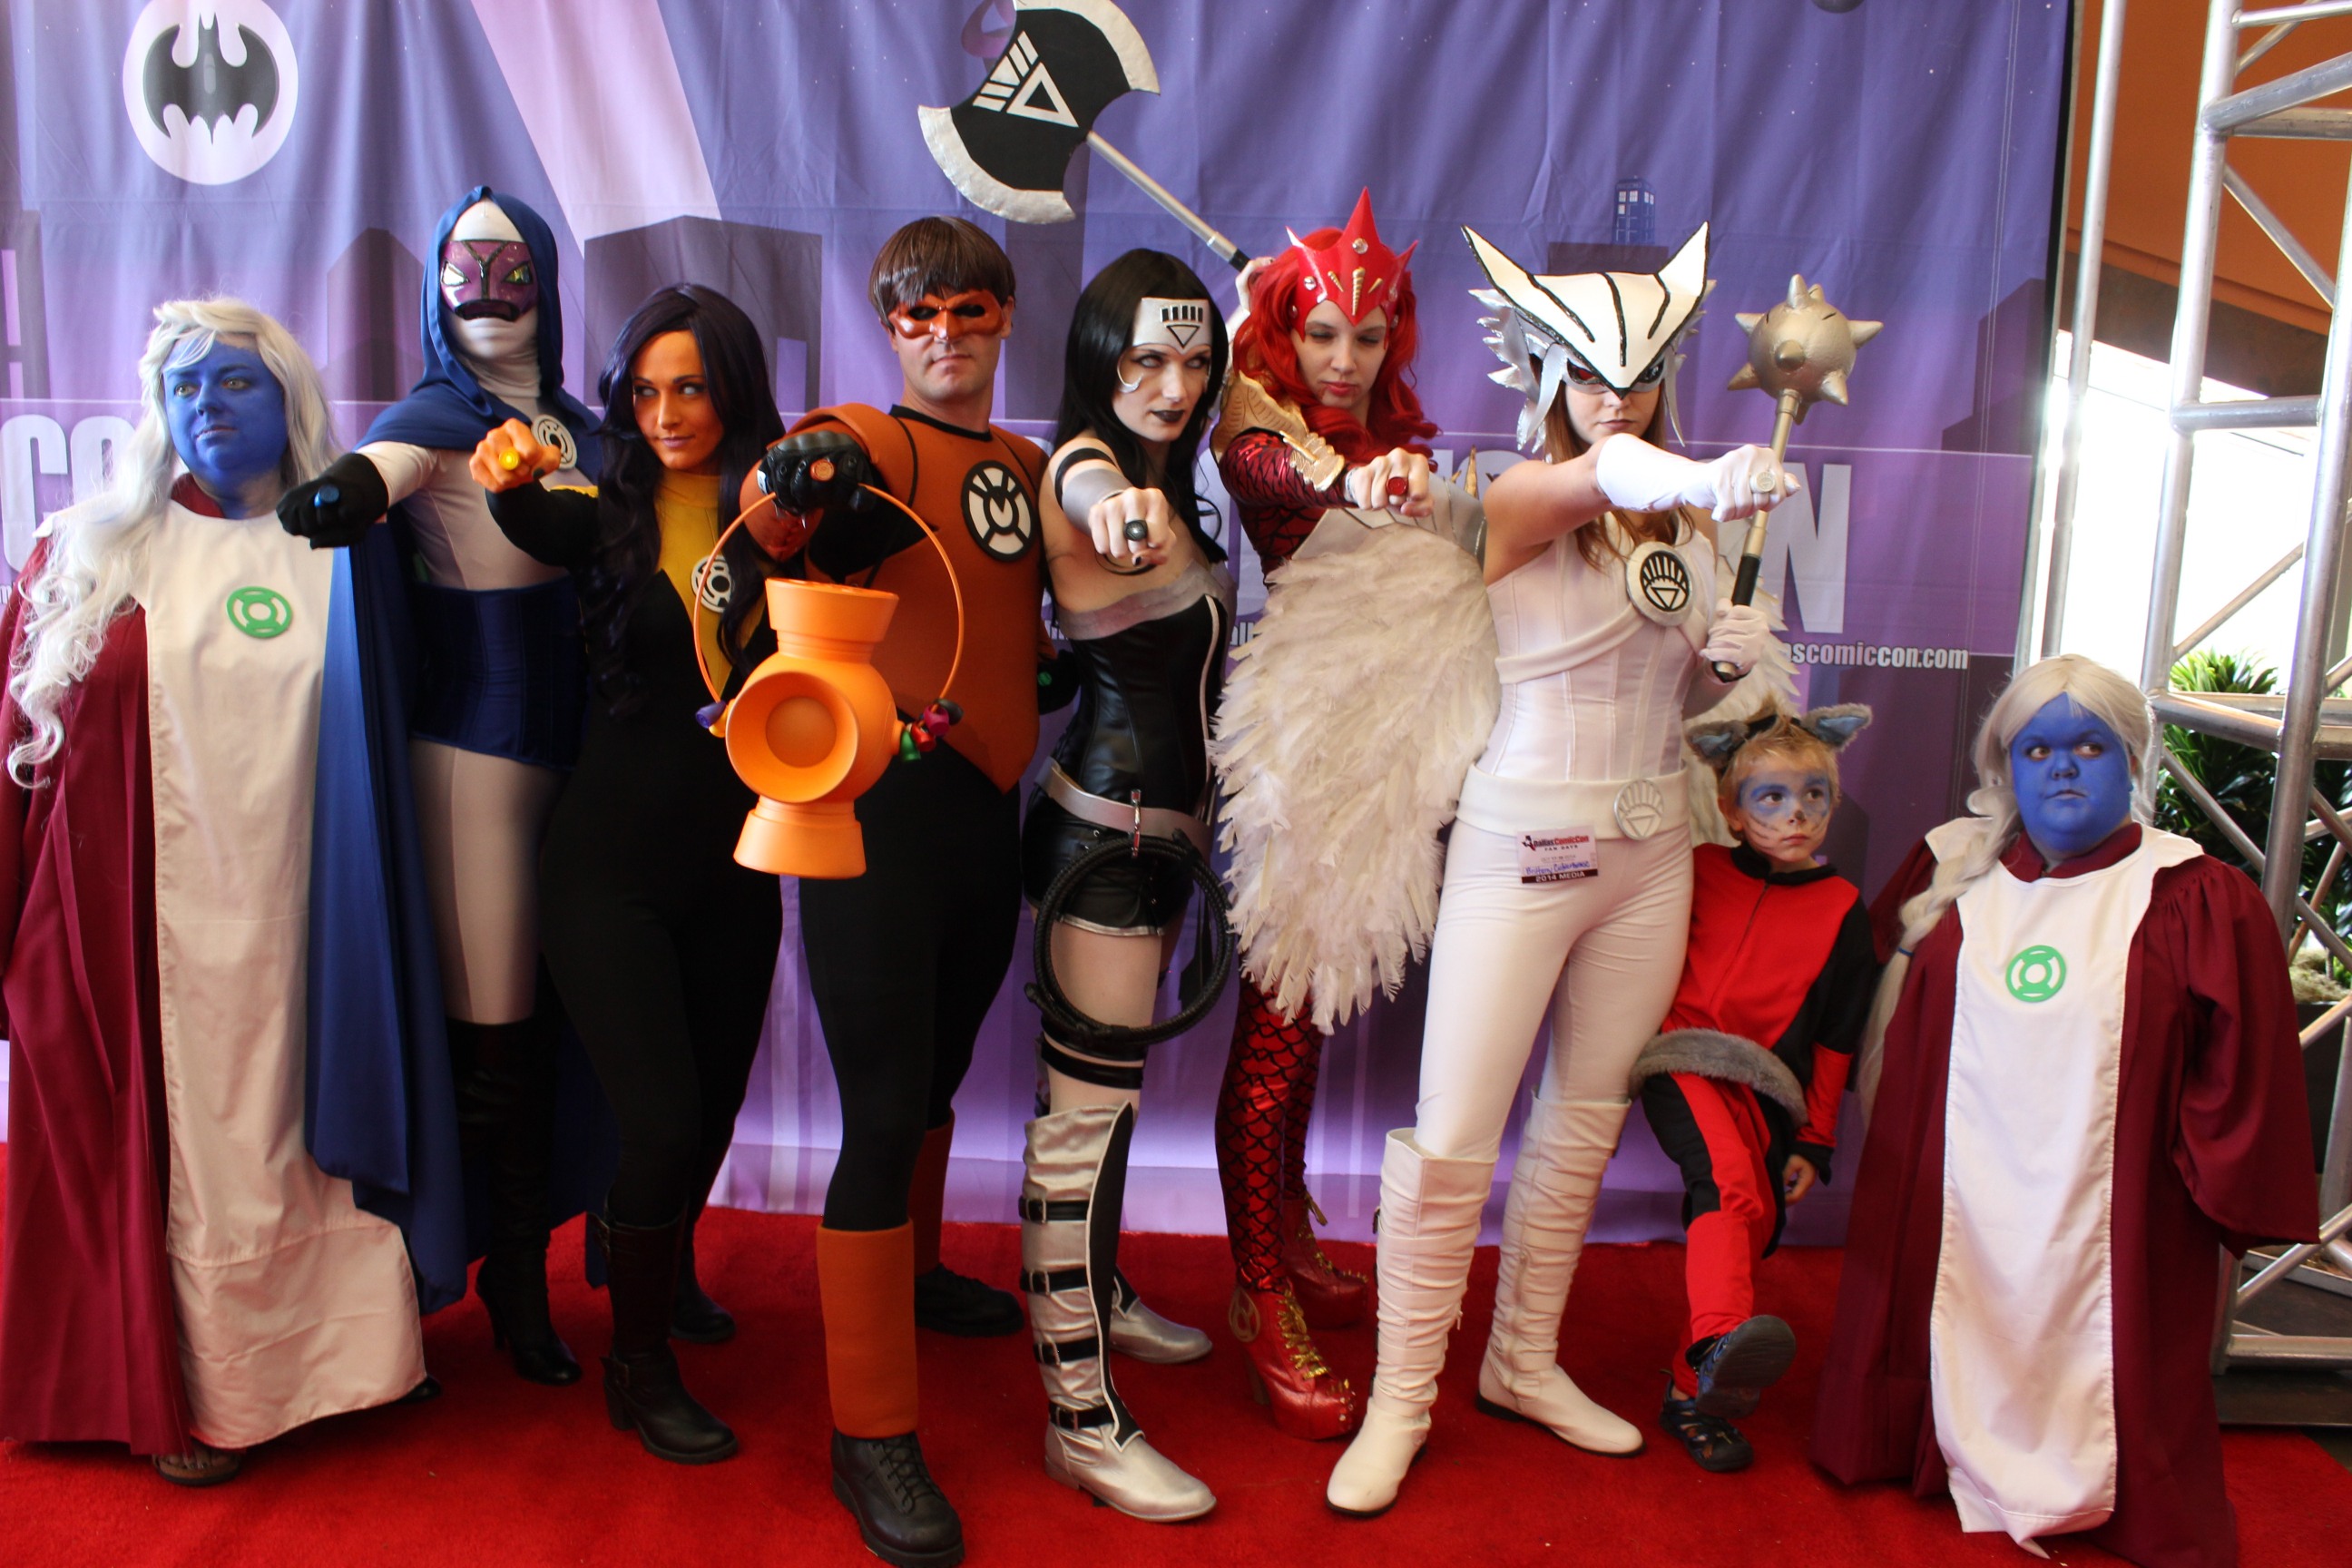 Dallas Fan Days 2014 part 2: The Cosplay part 1